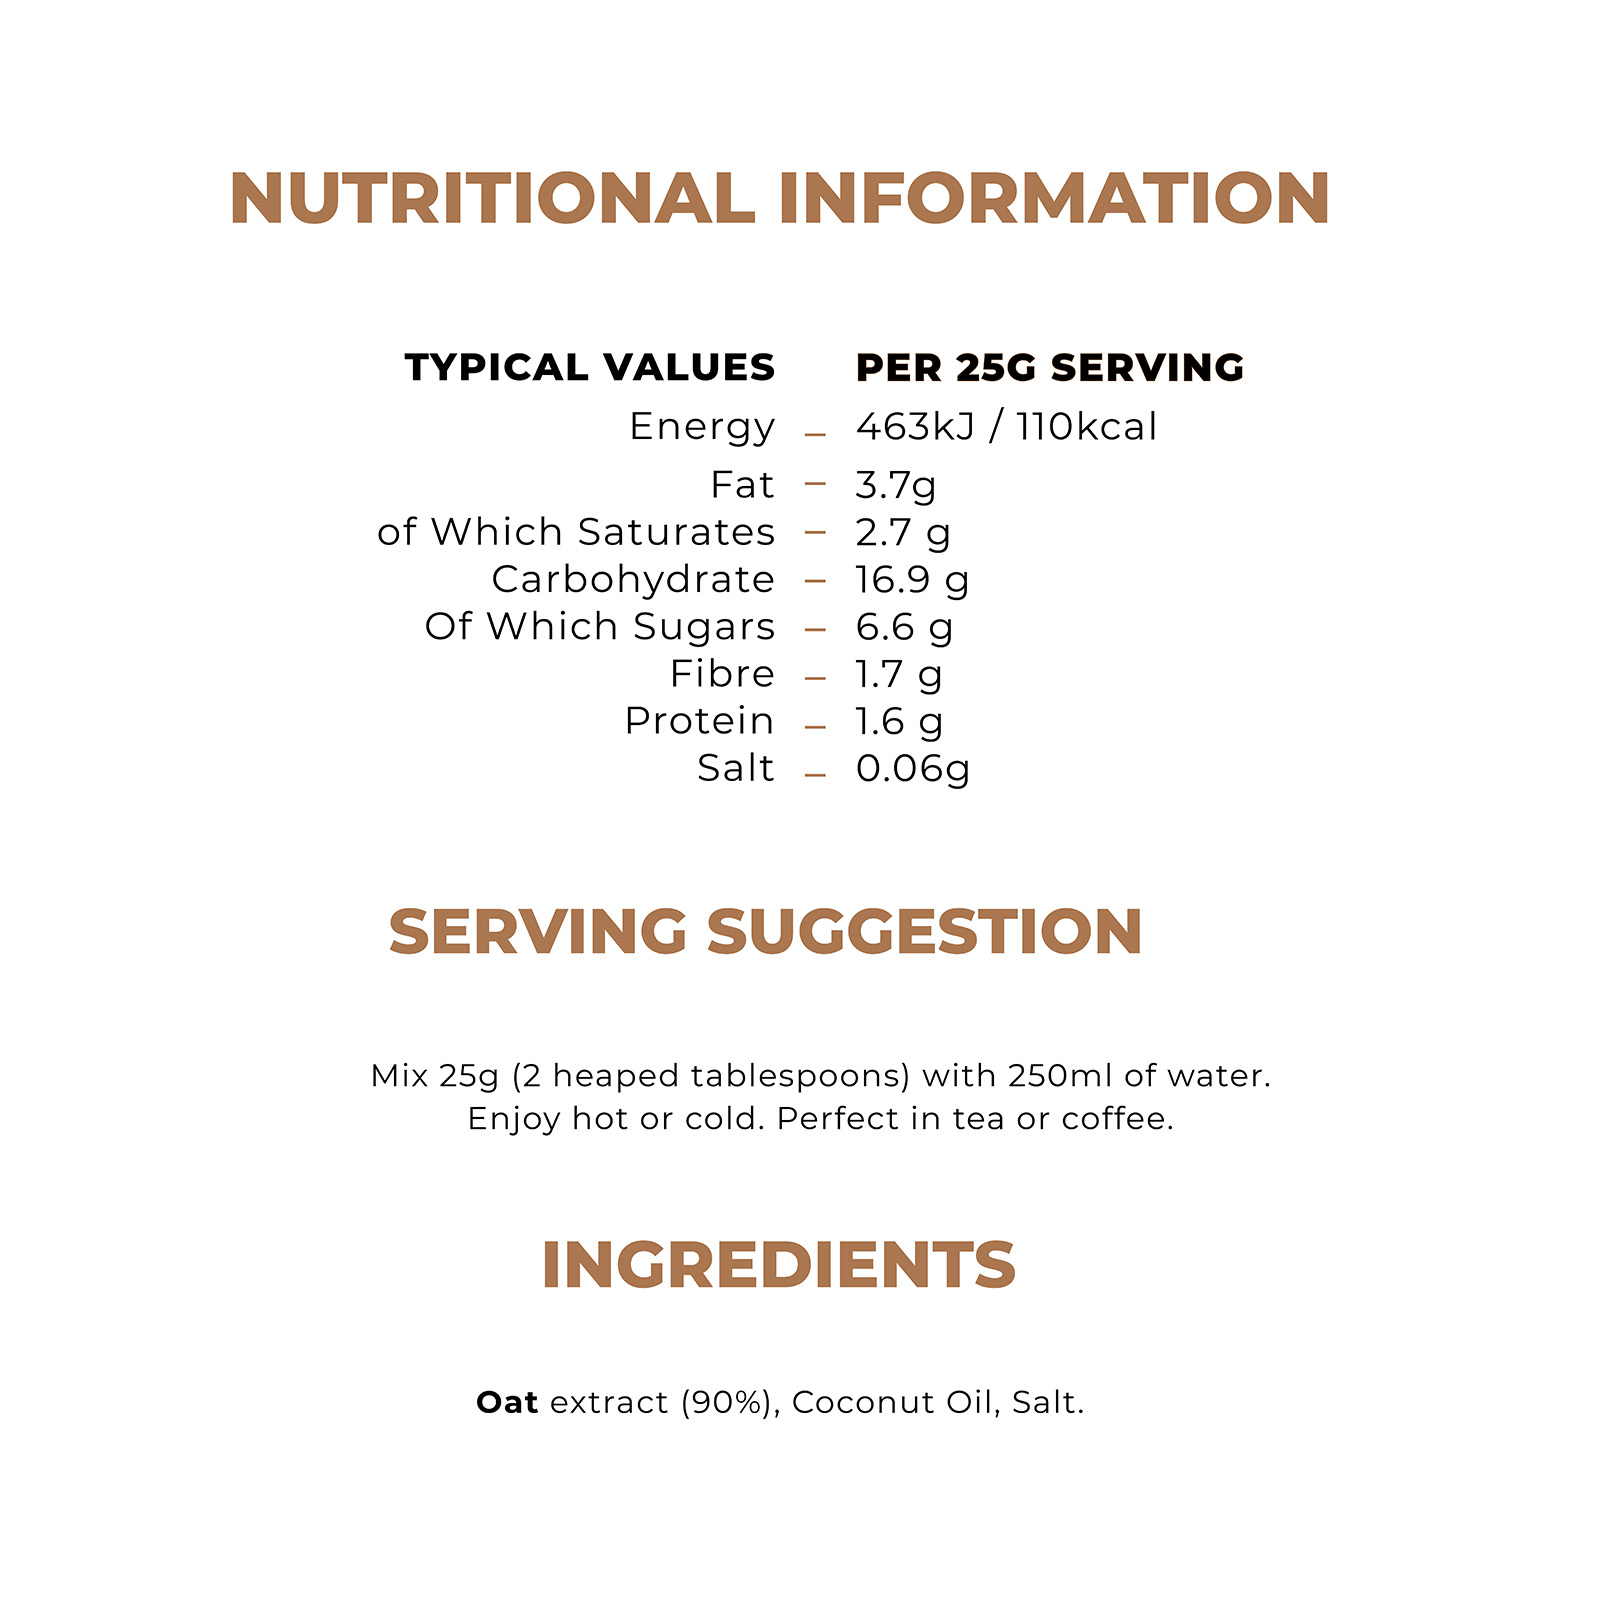 Nutritional Information. Typical values, Per 25g serving. Energy - 463kj/110kcal, fat - 3.7g, of which saturates - 2.7g, carbohydrate -16.9g, of which sugars - 6.6g, fibre - 1.7g, protein - 1.6g, salt - 0.06g. Serving suggestion. Mix 25g (2 heaped tablespoons) with 250ml of water. Enjoy hot or cold. Perfect in tea or coffee. Ingredients. Oat extract (90%), Coconut oil, salt.